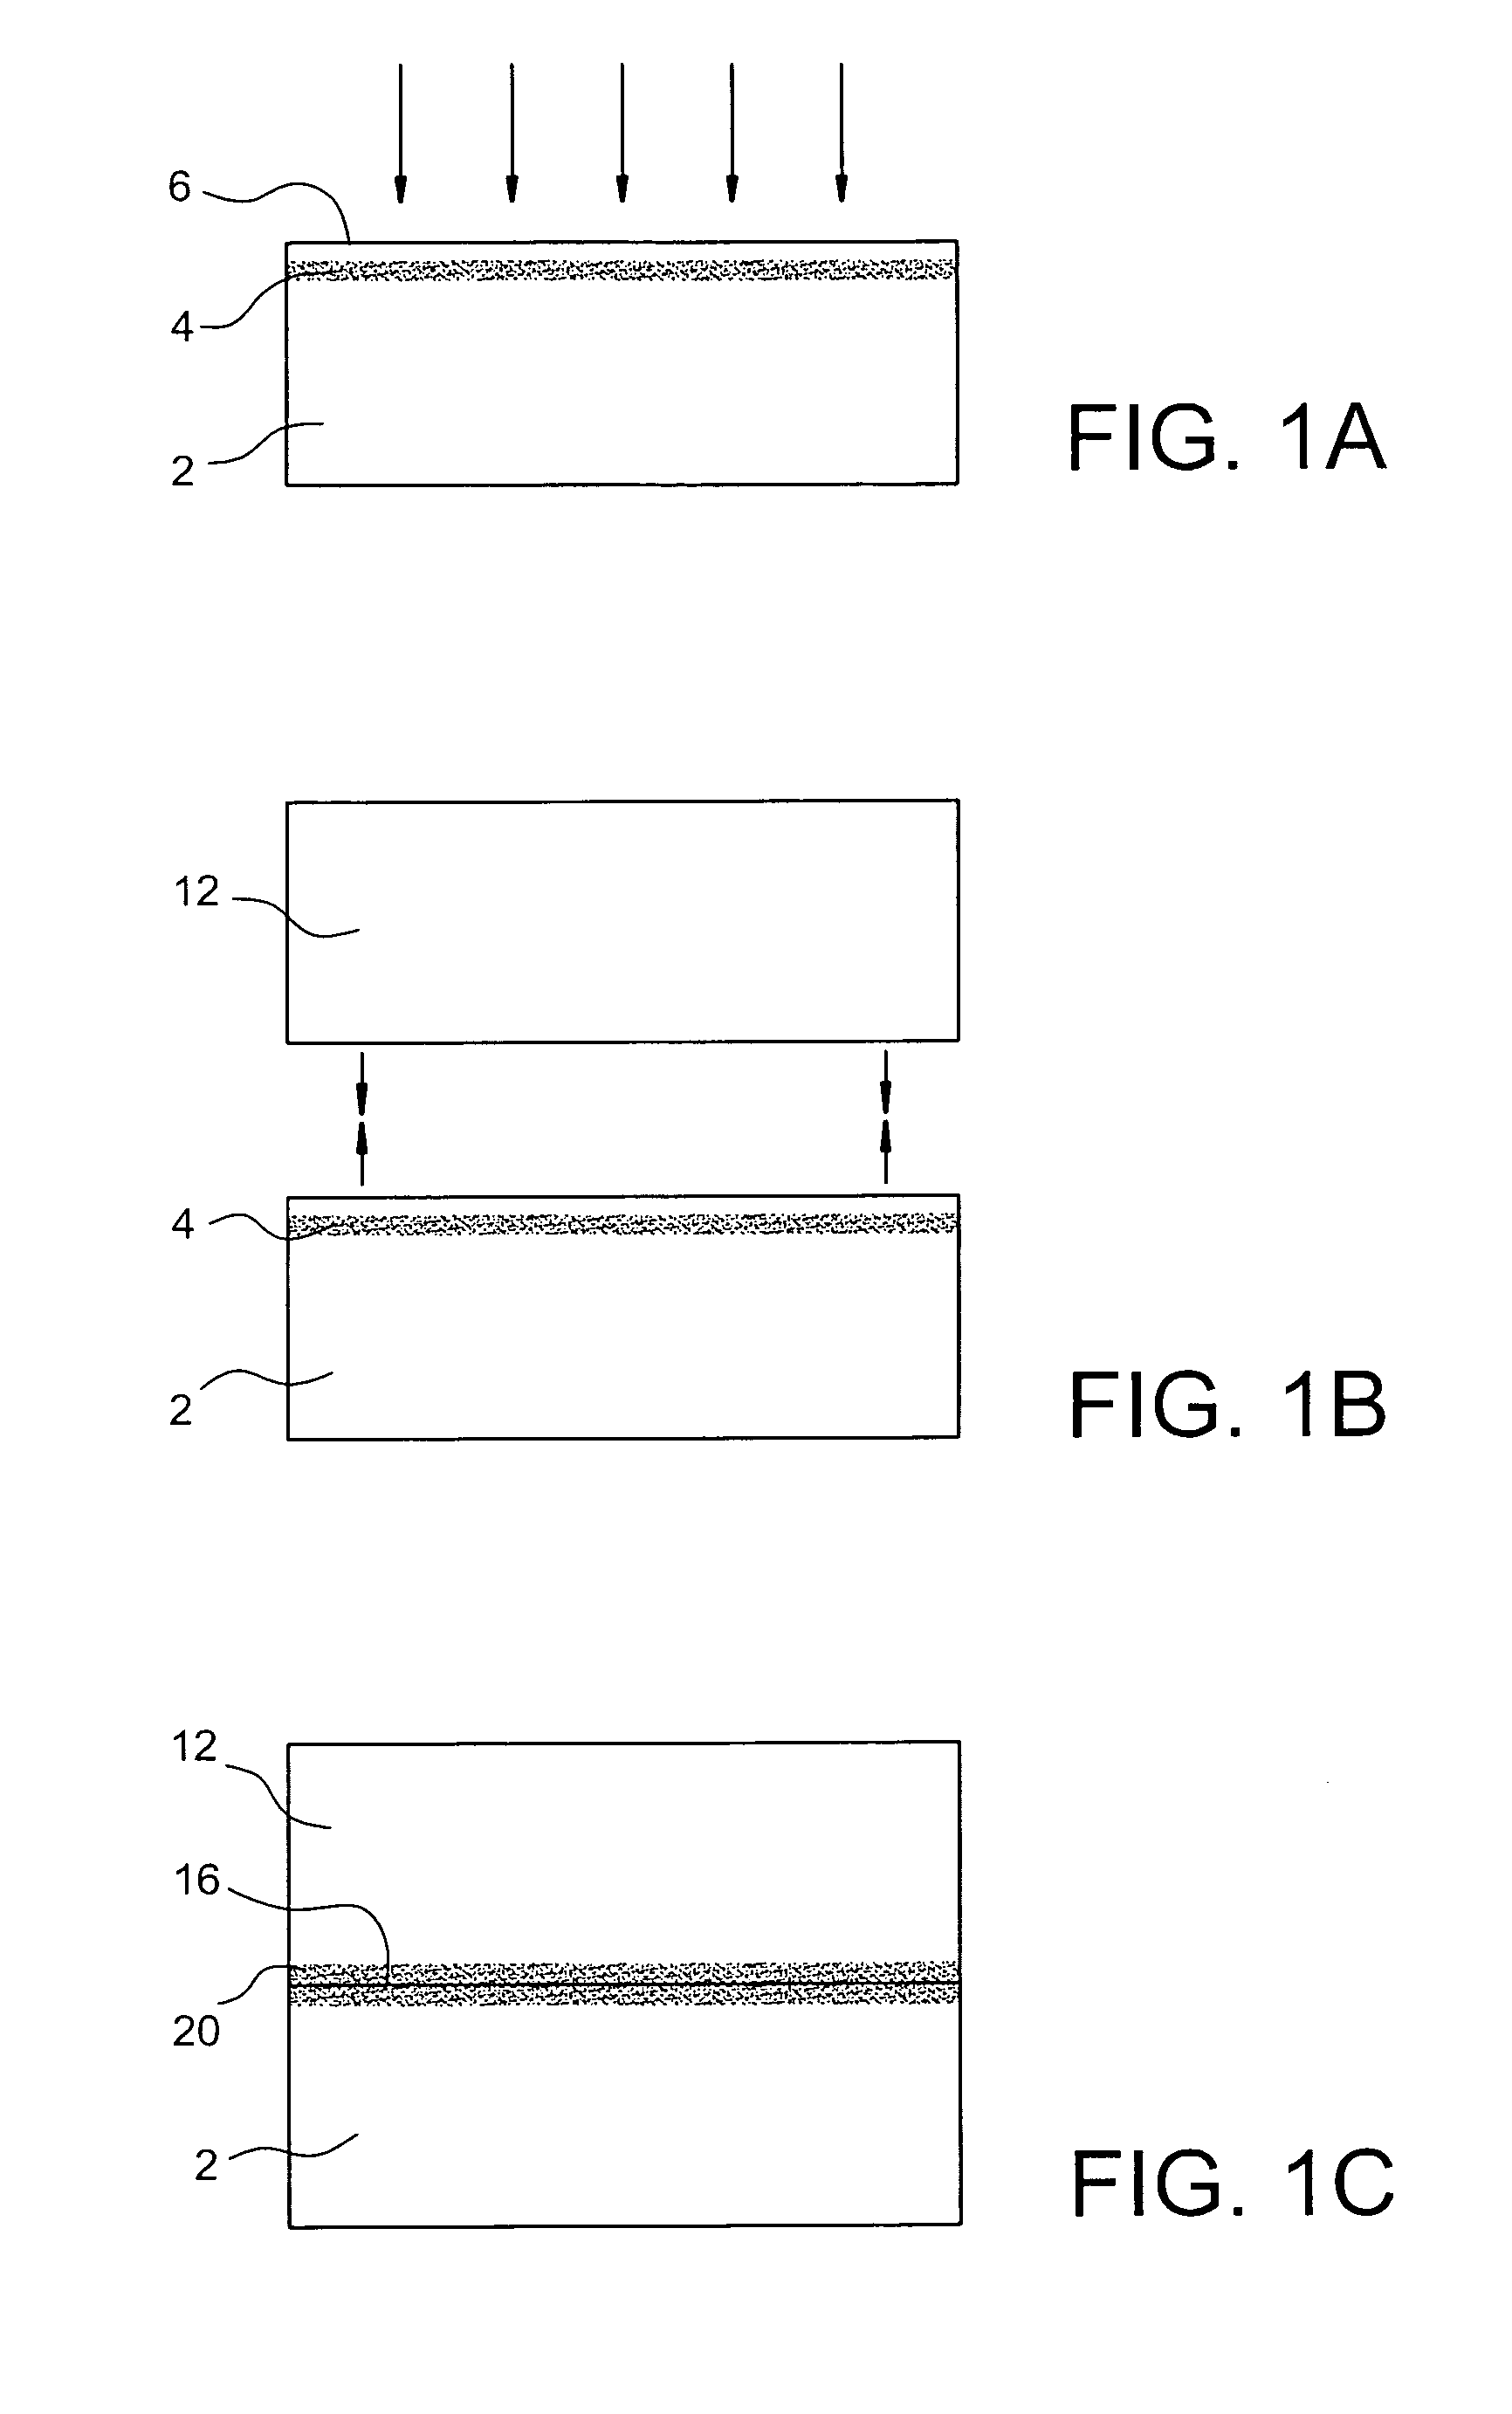 Method of sealing two plates with the formation of an ohmic contact therebetween